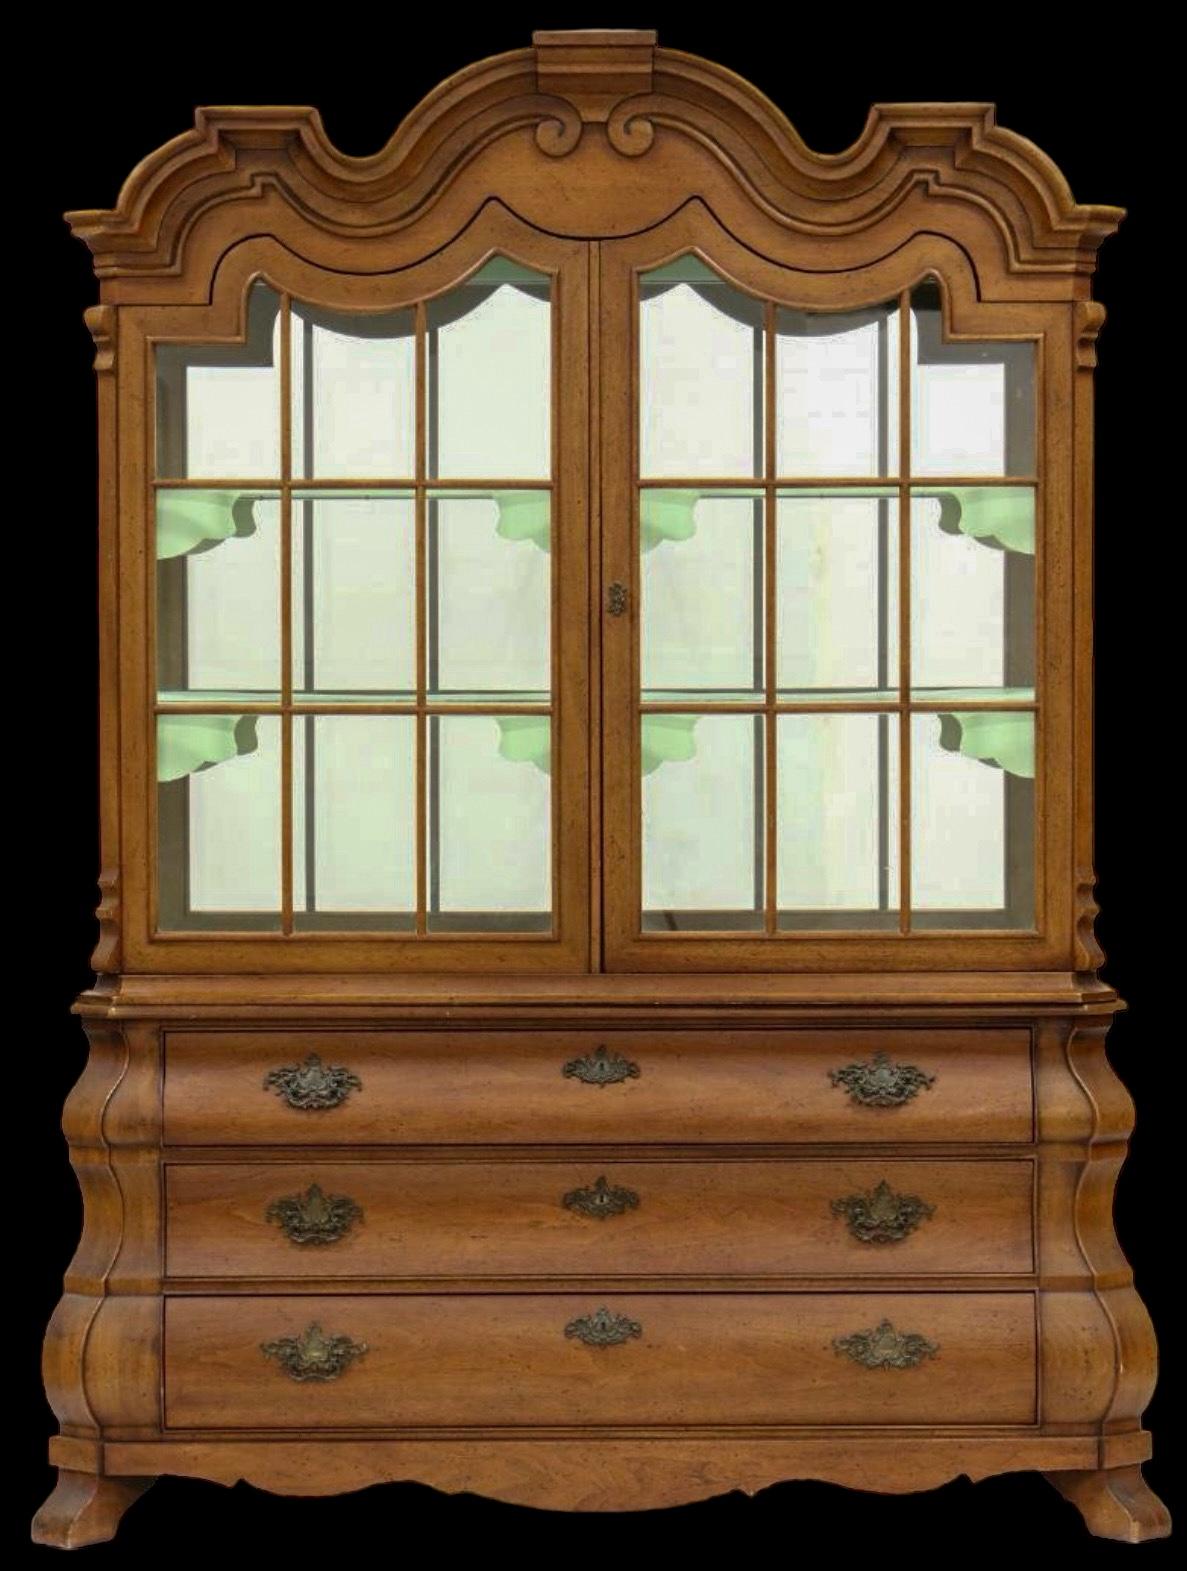 This glazed walnut cabinet was designed by Dorothy Draper for Henredon as part of her Viennese Collection. It has Dutch styling with its highly stylized styling and bombe base. The interior is a seafoam color with mirrored back. It is in very good